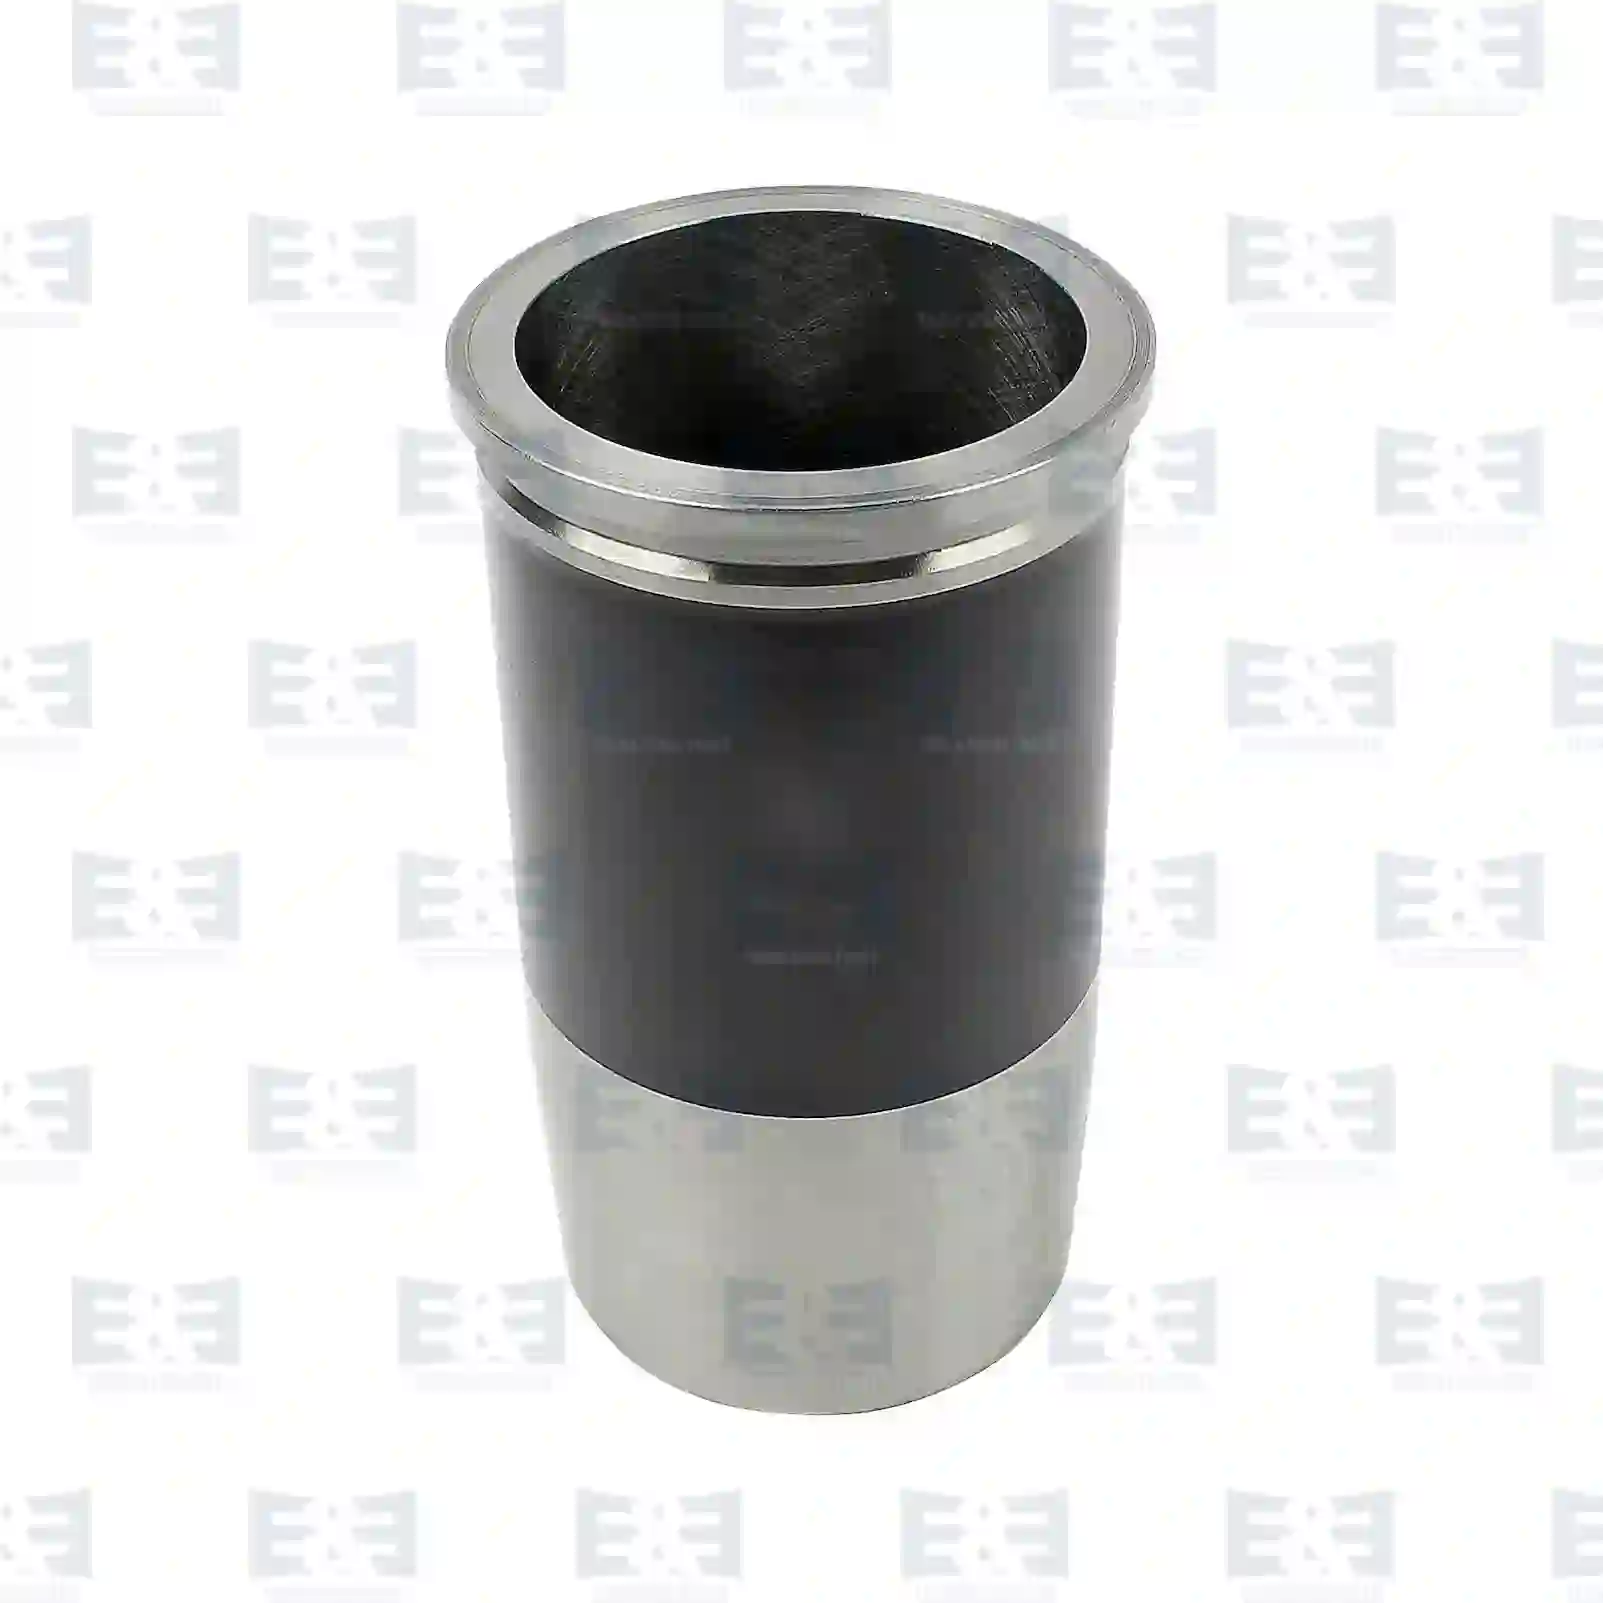 Cylinder liner, without seal rings, 2E2209946, 51012010417 ||  2E2209946 E&E Truck Spare Parts | Truck Spare Parts, Auotomotive Spare Parts Cylinder liner, without seal rings, 2E2209946, 51012010417 ||  2E2209946 E&E Truck Spare Parts | Truck Spare Parts, Auotomotive Spare Parts